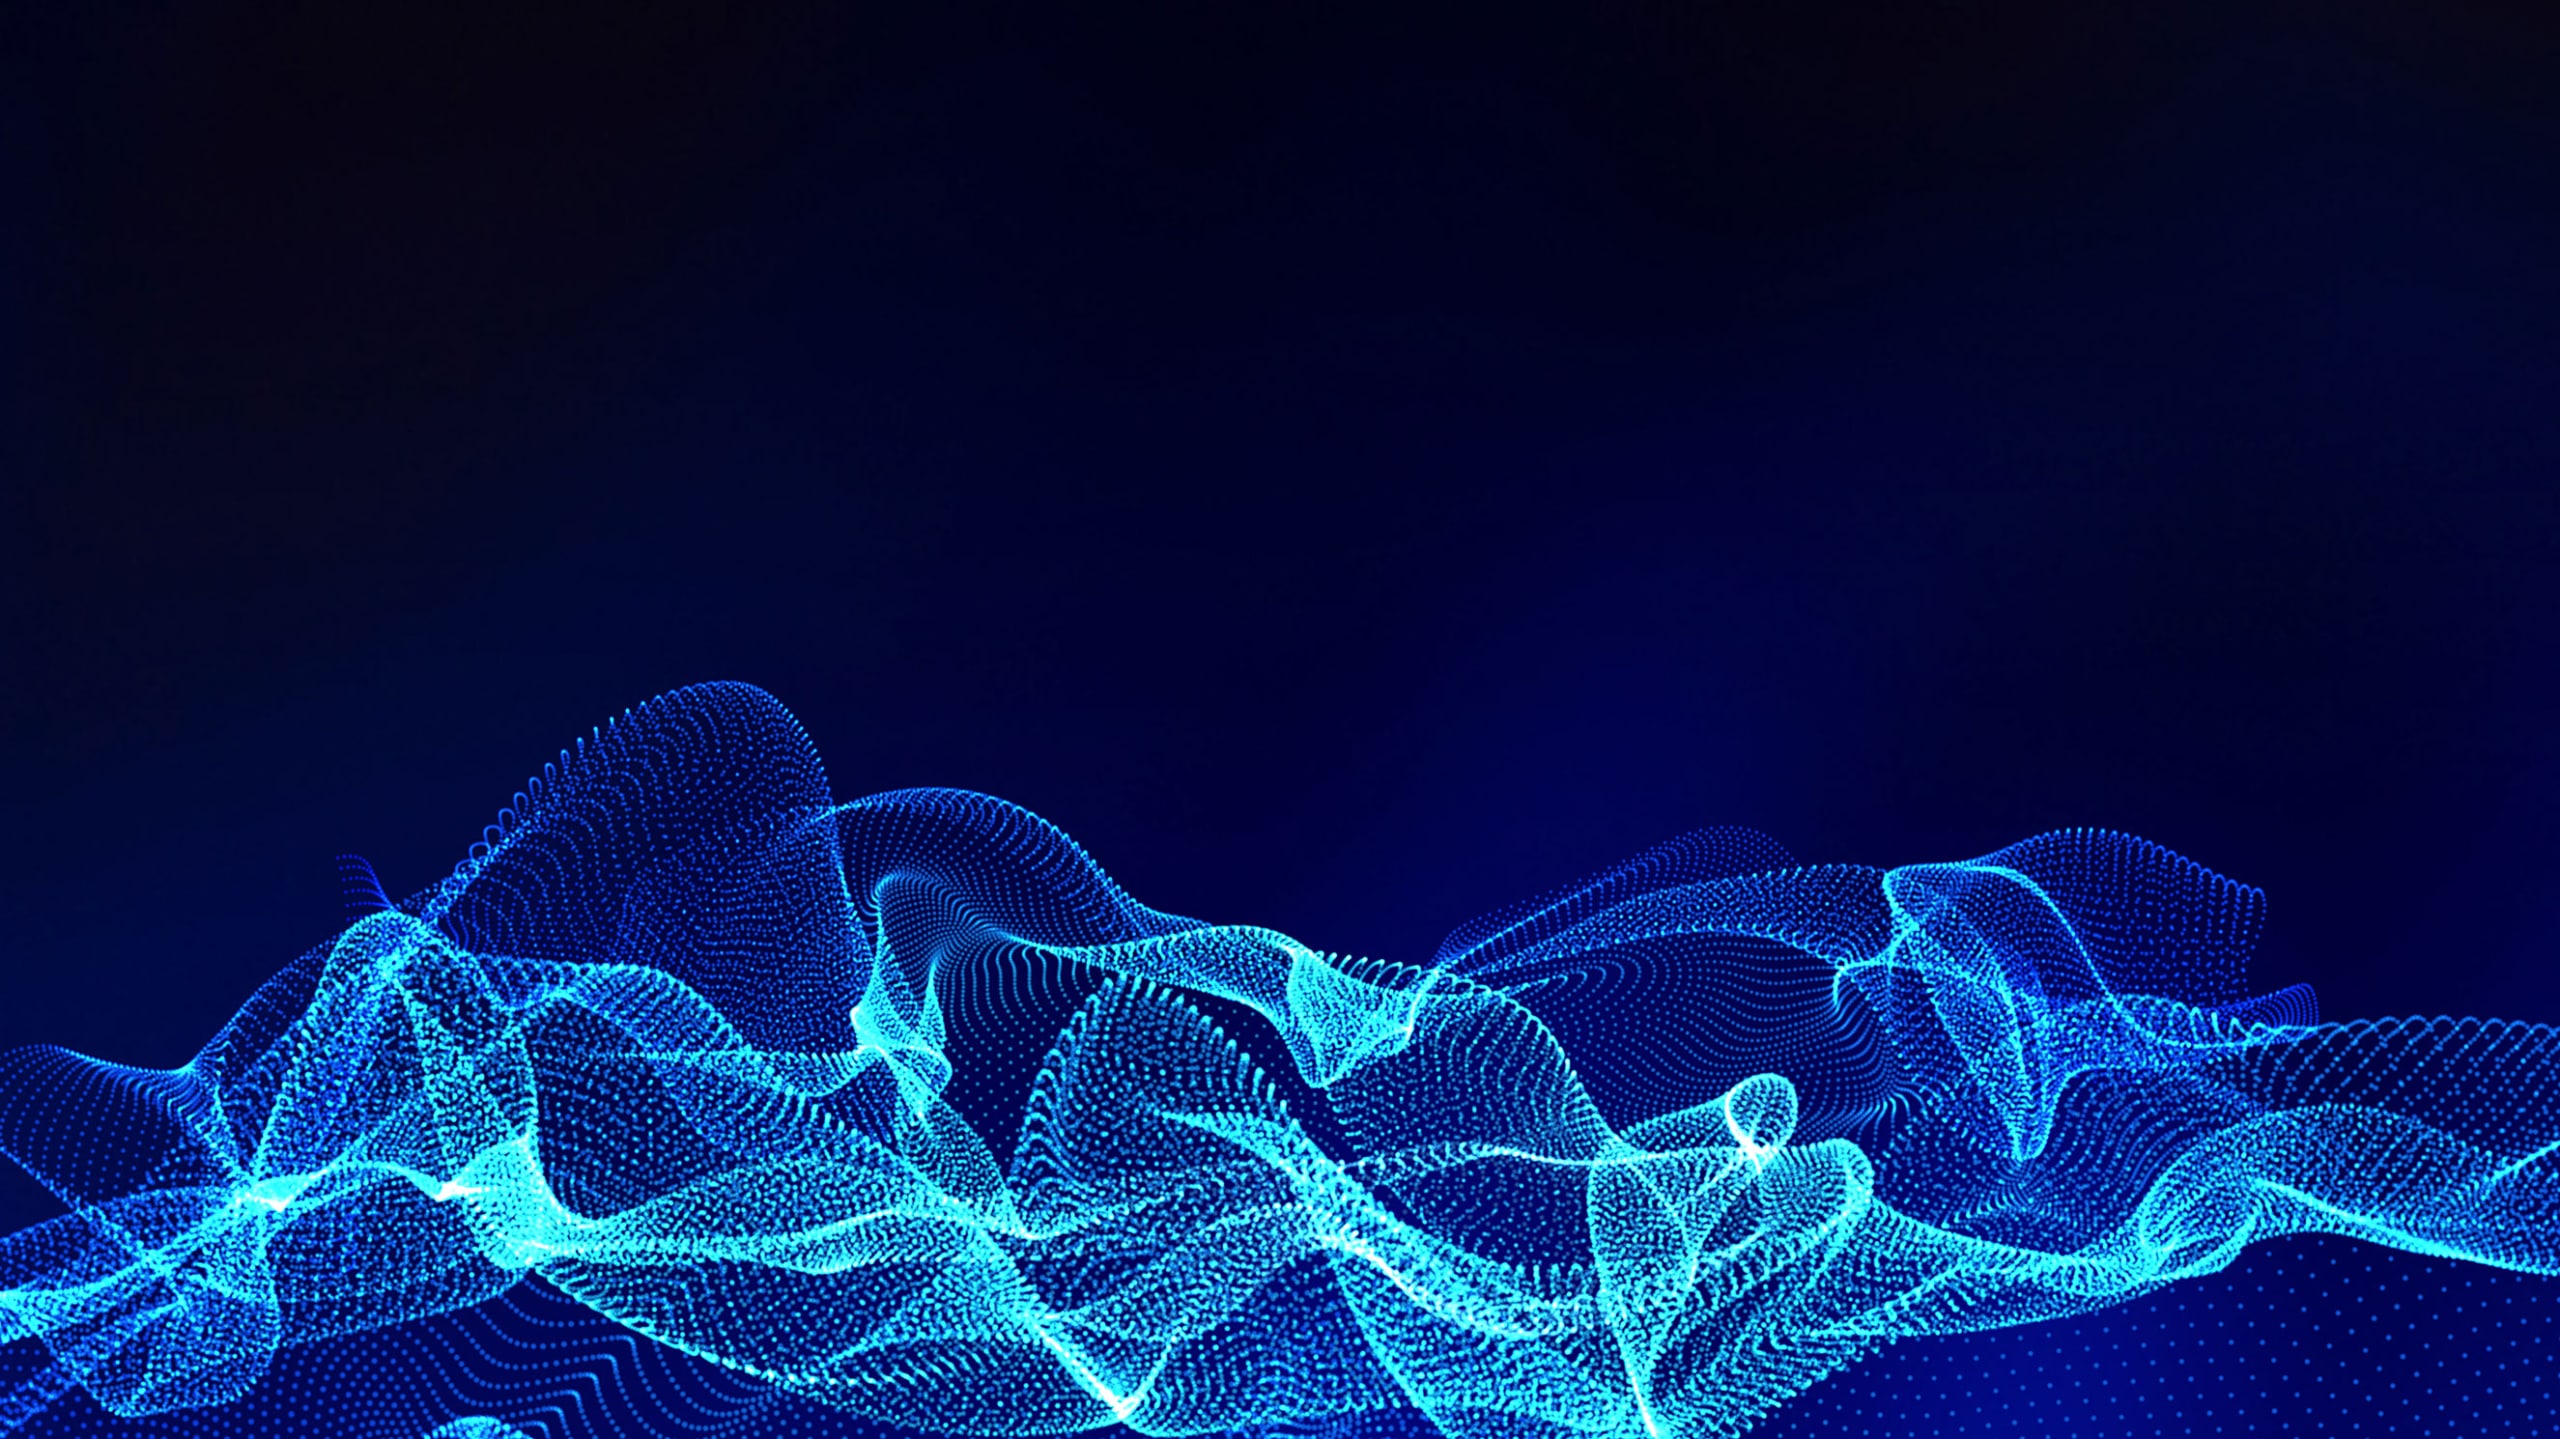 Abstract digital wallpaper featuring a dynamic, wavy pattern of blue glowing particles on a dark background, creating a visual effect that resembles a flowing, luminescent network.